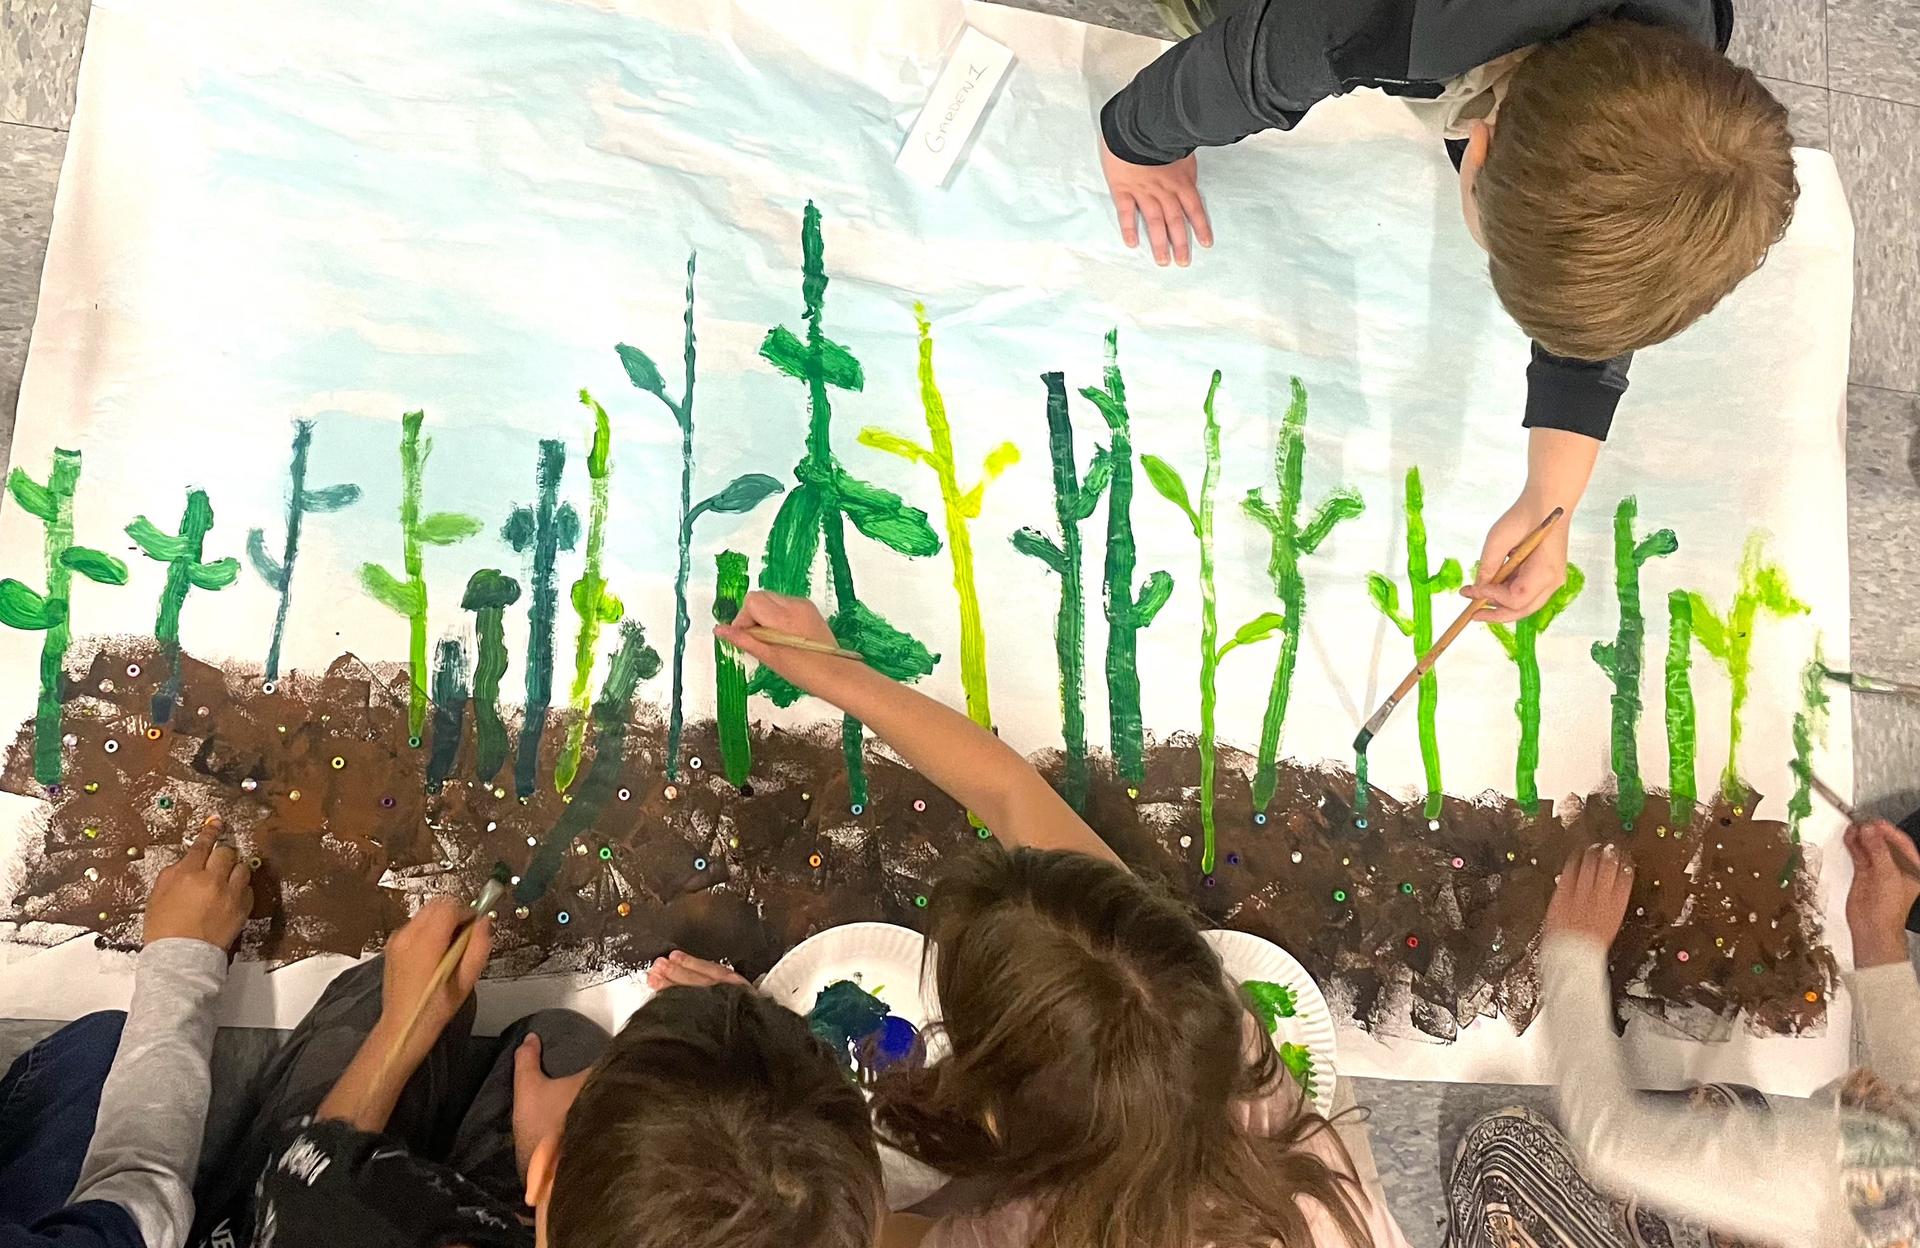 Grade 1, Quidnessett Elementary School “Growing Gardens Mural Project”  Students explore phases of plant life and demonstrate great teamwork!